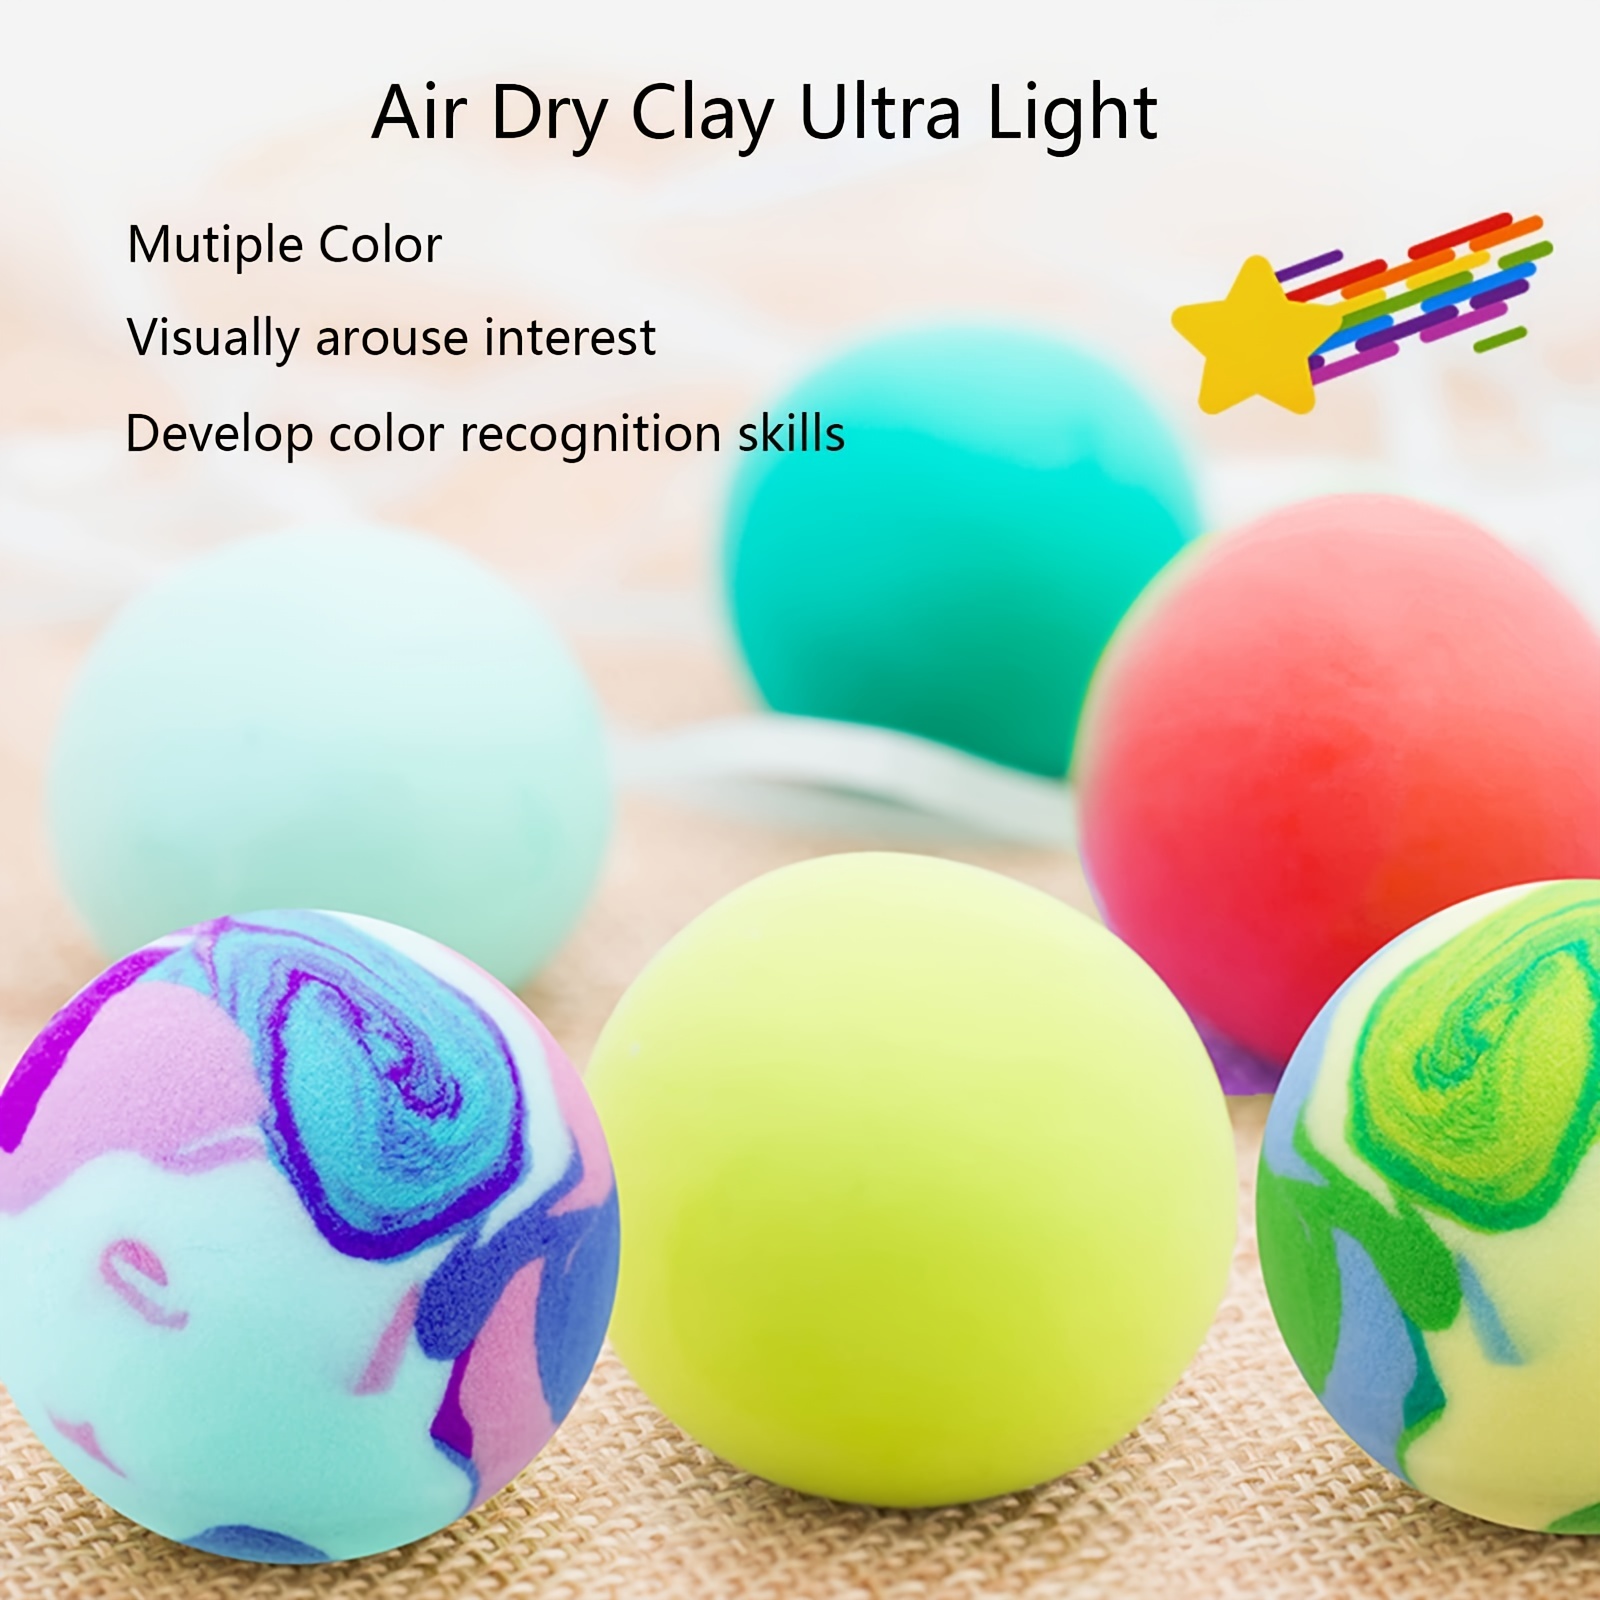 Wolwefa Modeling Clay Kit - 12 Colors Air Dry Ultra Light Clay, Magic Clay,  DIY Molding Clay for Kids, DIY Clay Kit with Sculpting Tools, Decoration